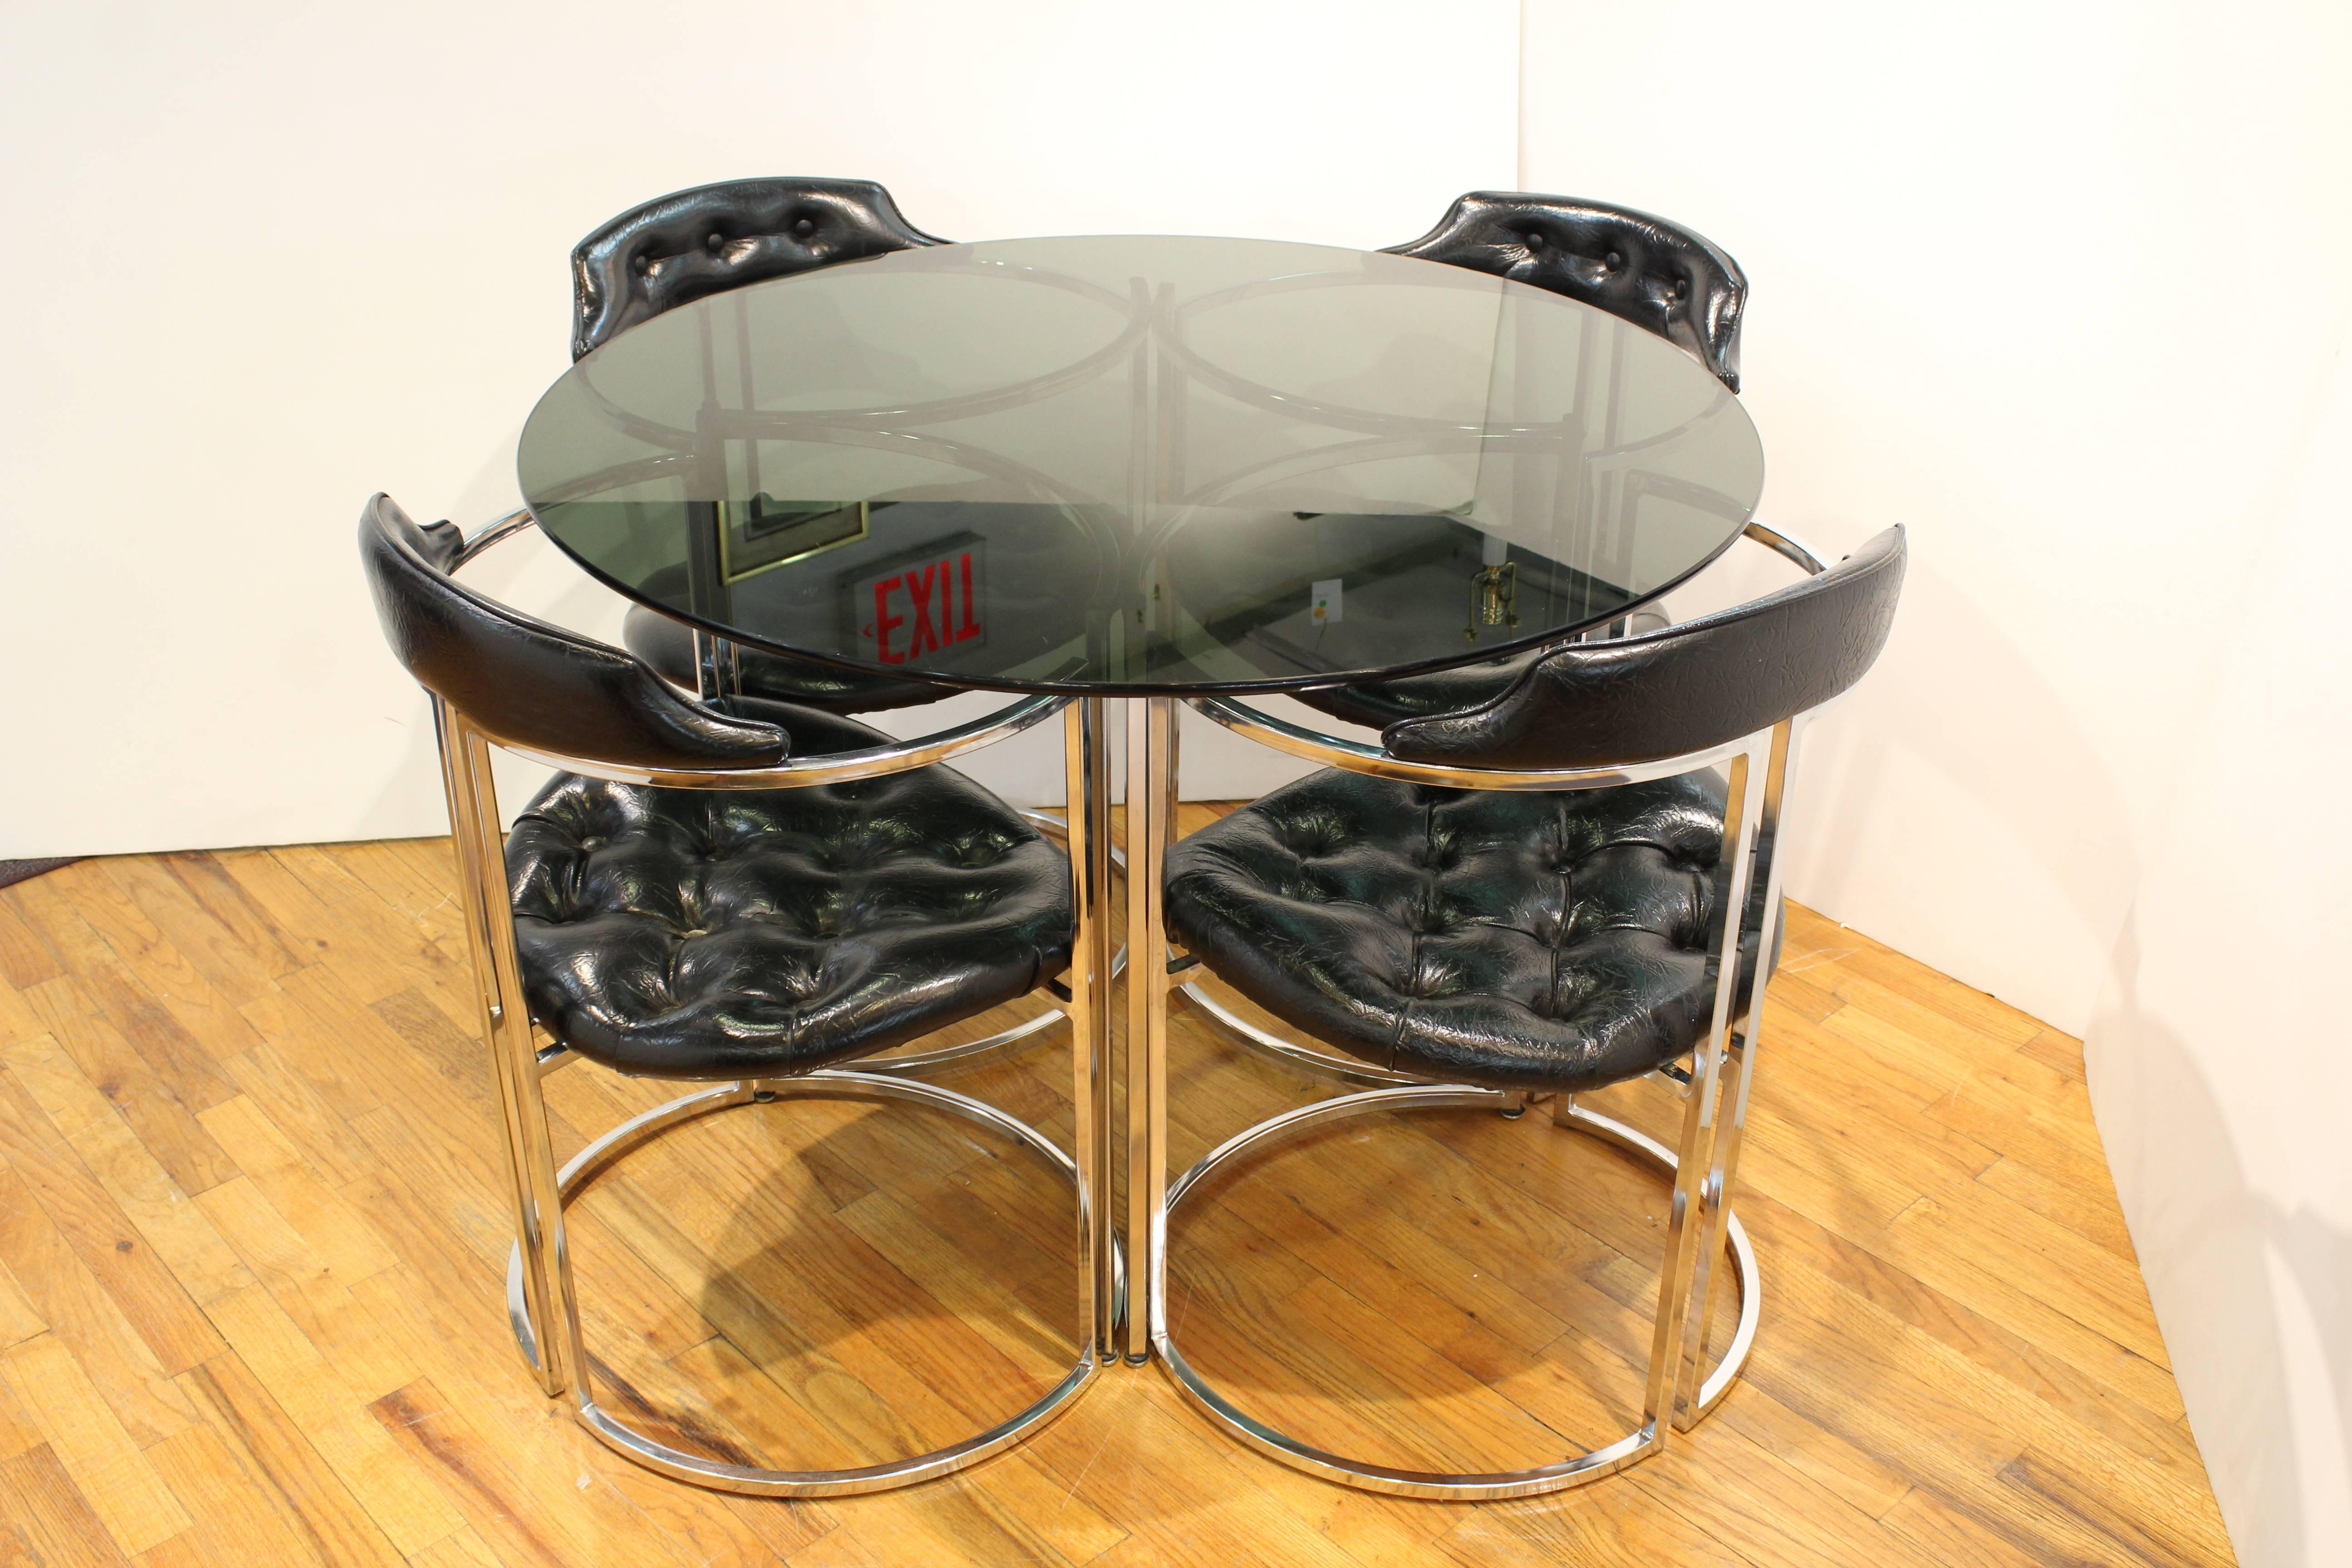 A dinette set in chrome, smoked glass and vinyl done in the style of Milo Baughman. Includes original label and punch card. Wear to the upholstery includes visible restoration. Some glass grips missing on the tabletop.

Measure: Table 42